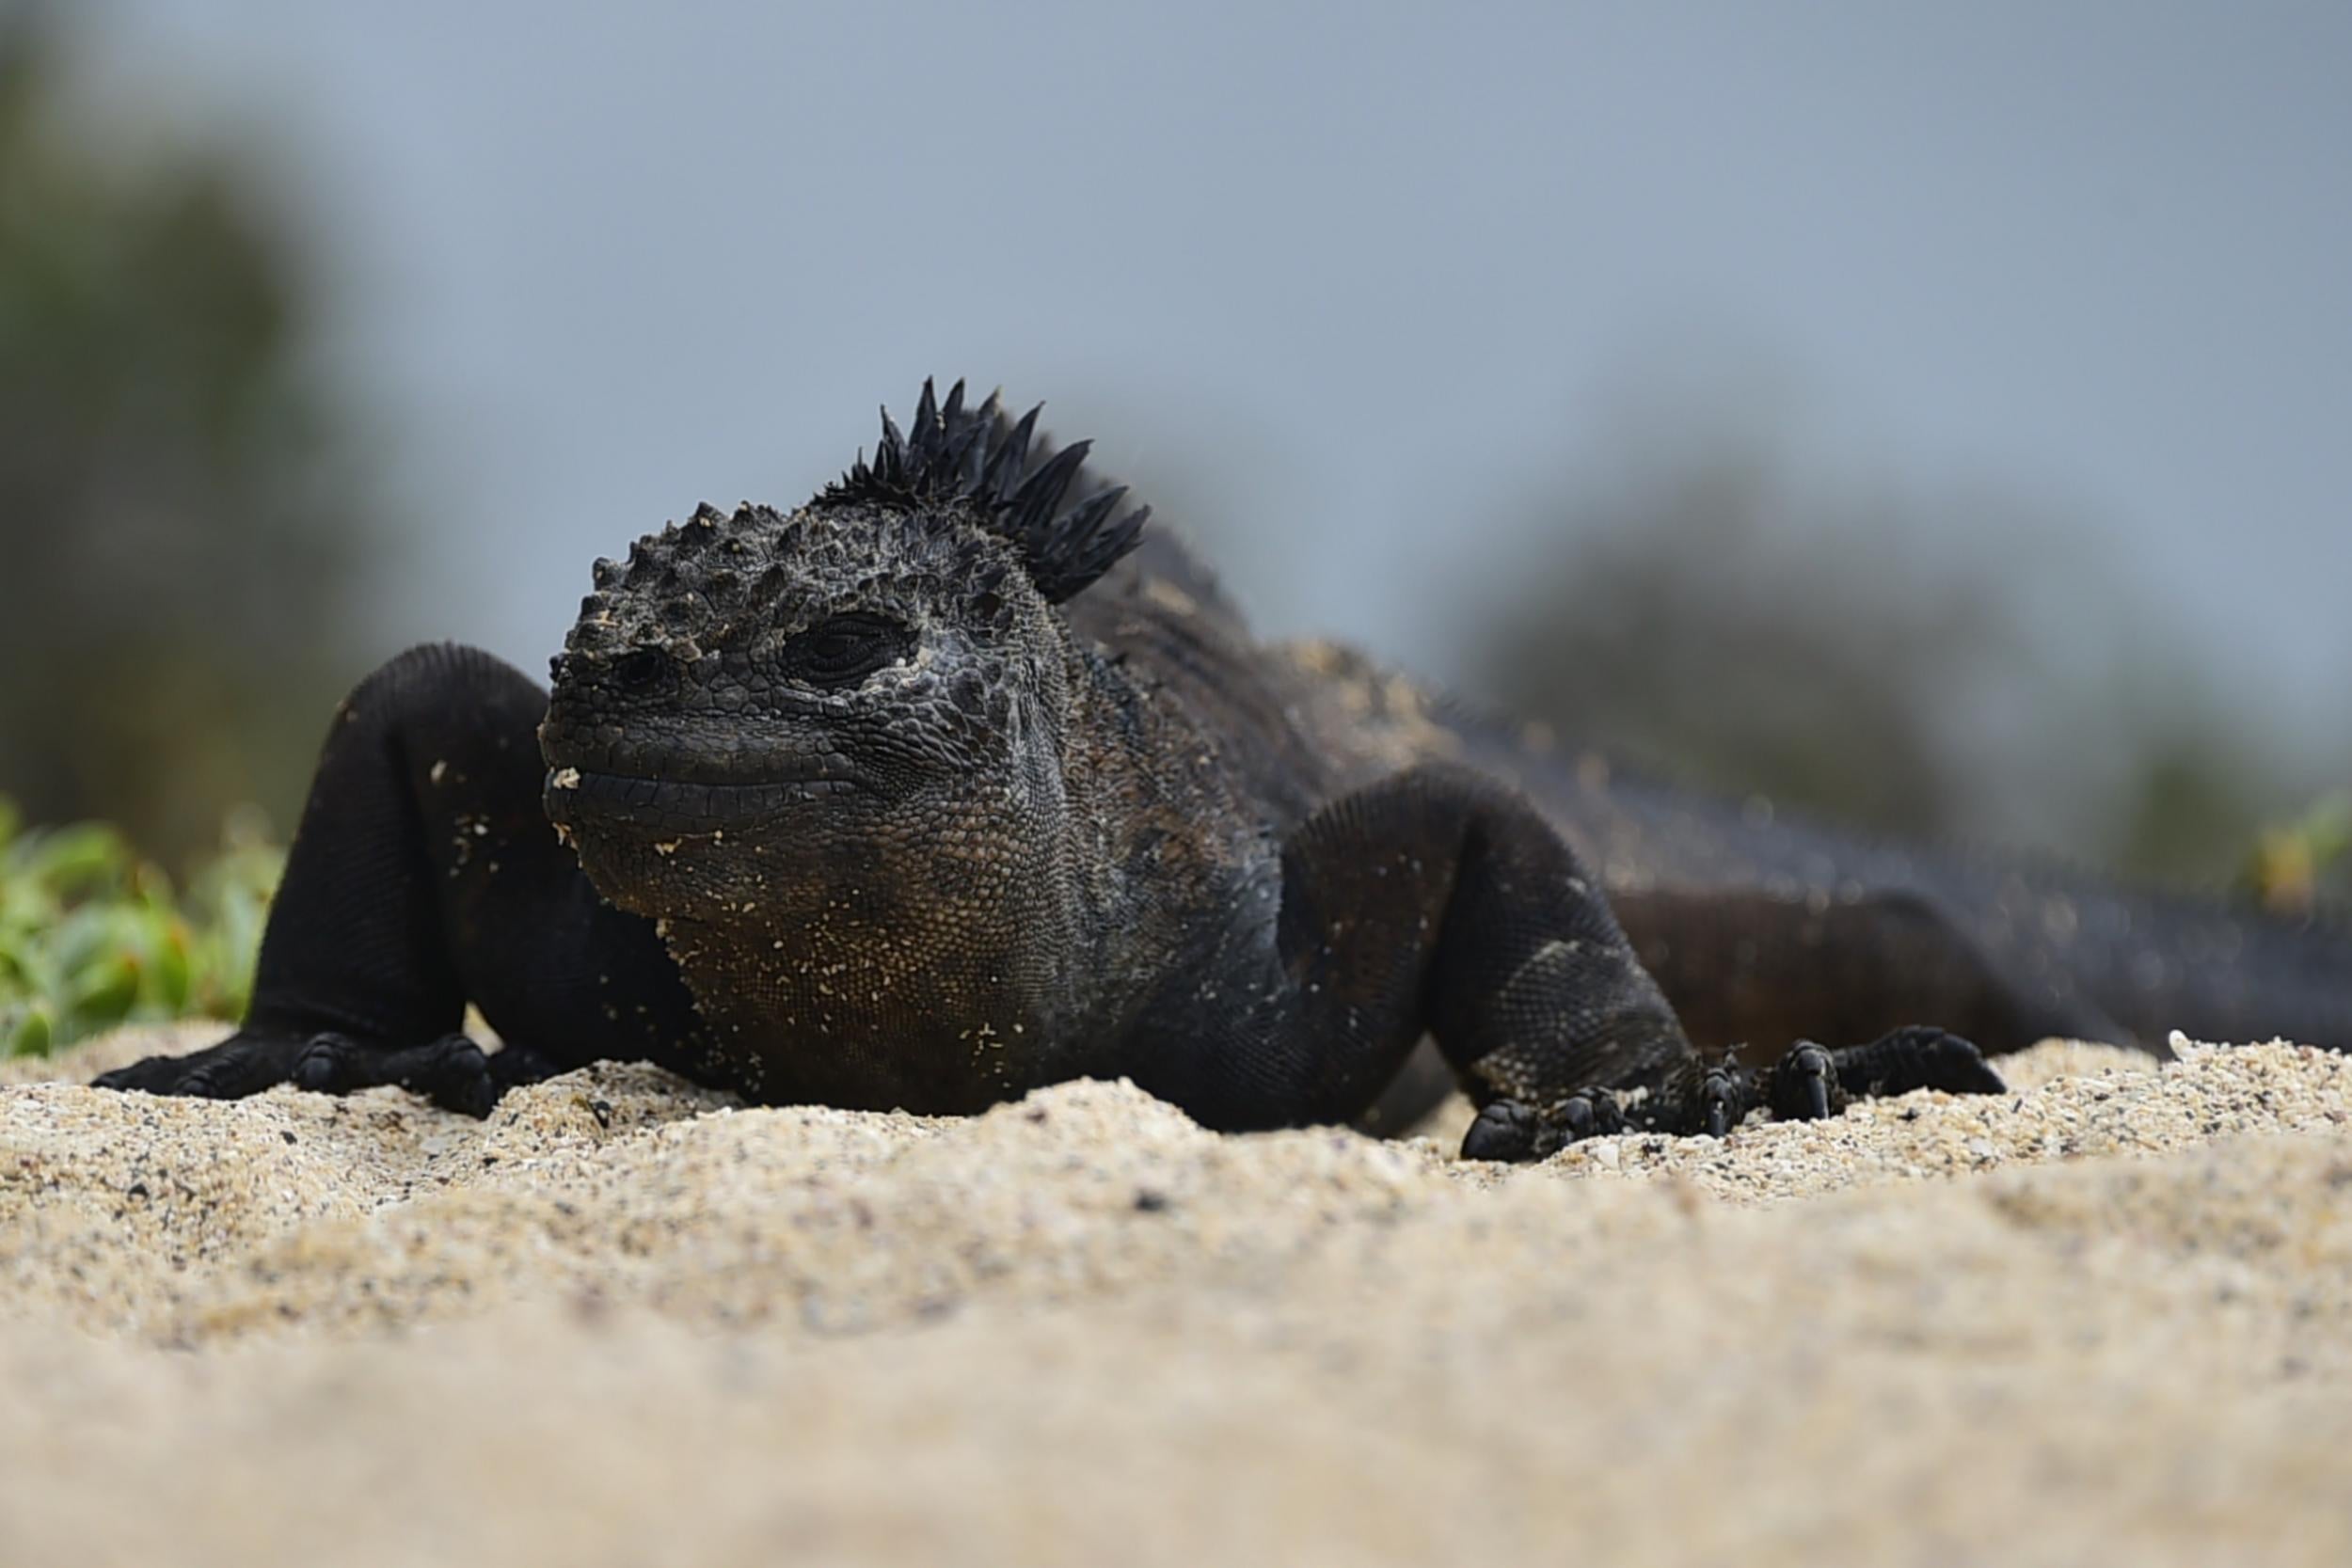 You can go swimming with marine iguanas in the Galapagos